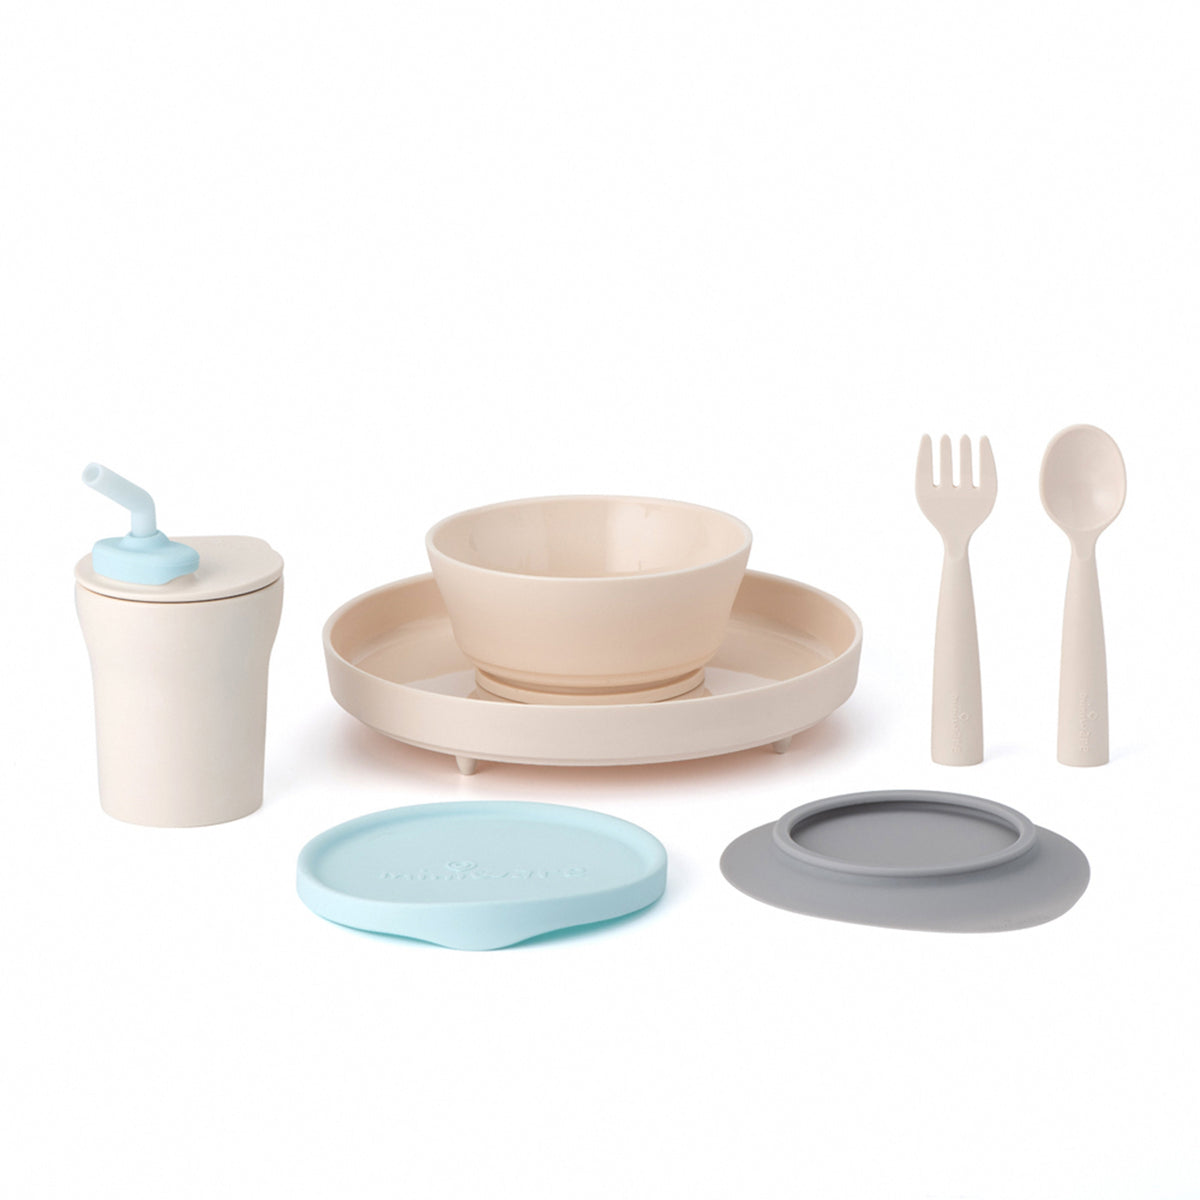 miniware-little-foodie-pla-suction-bowl-plate-cutlery-set-silicone-cover-in-aqua-sippy-cup-set- (2)